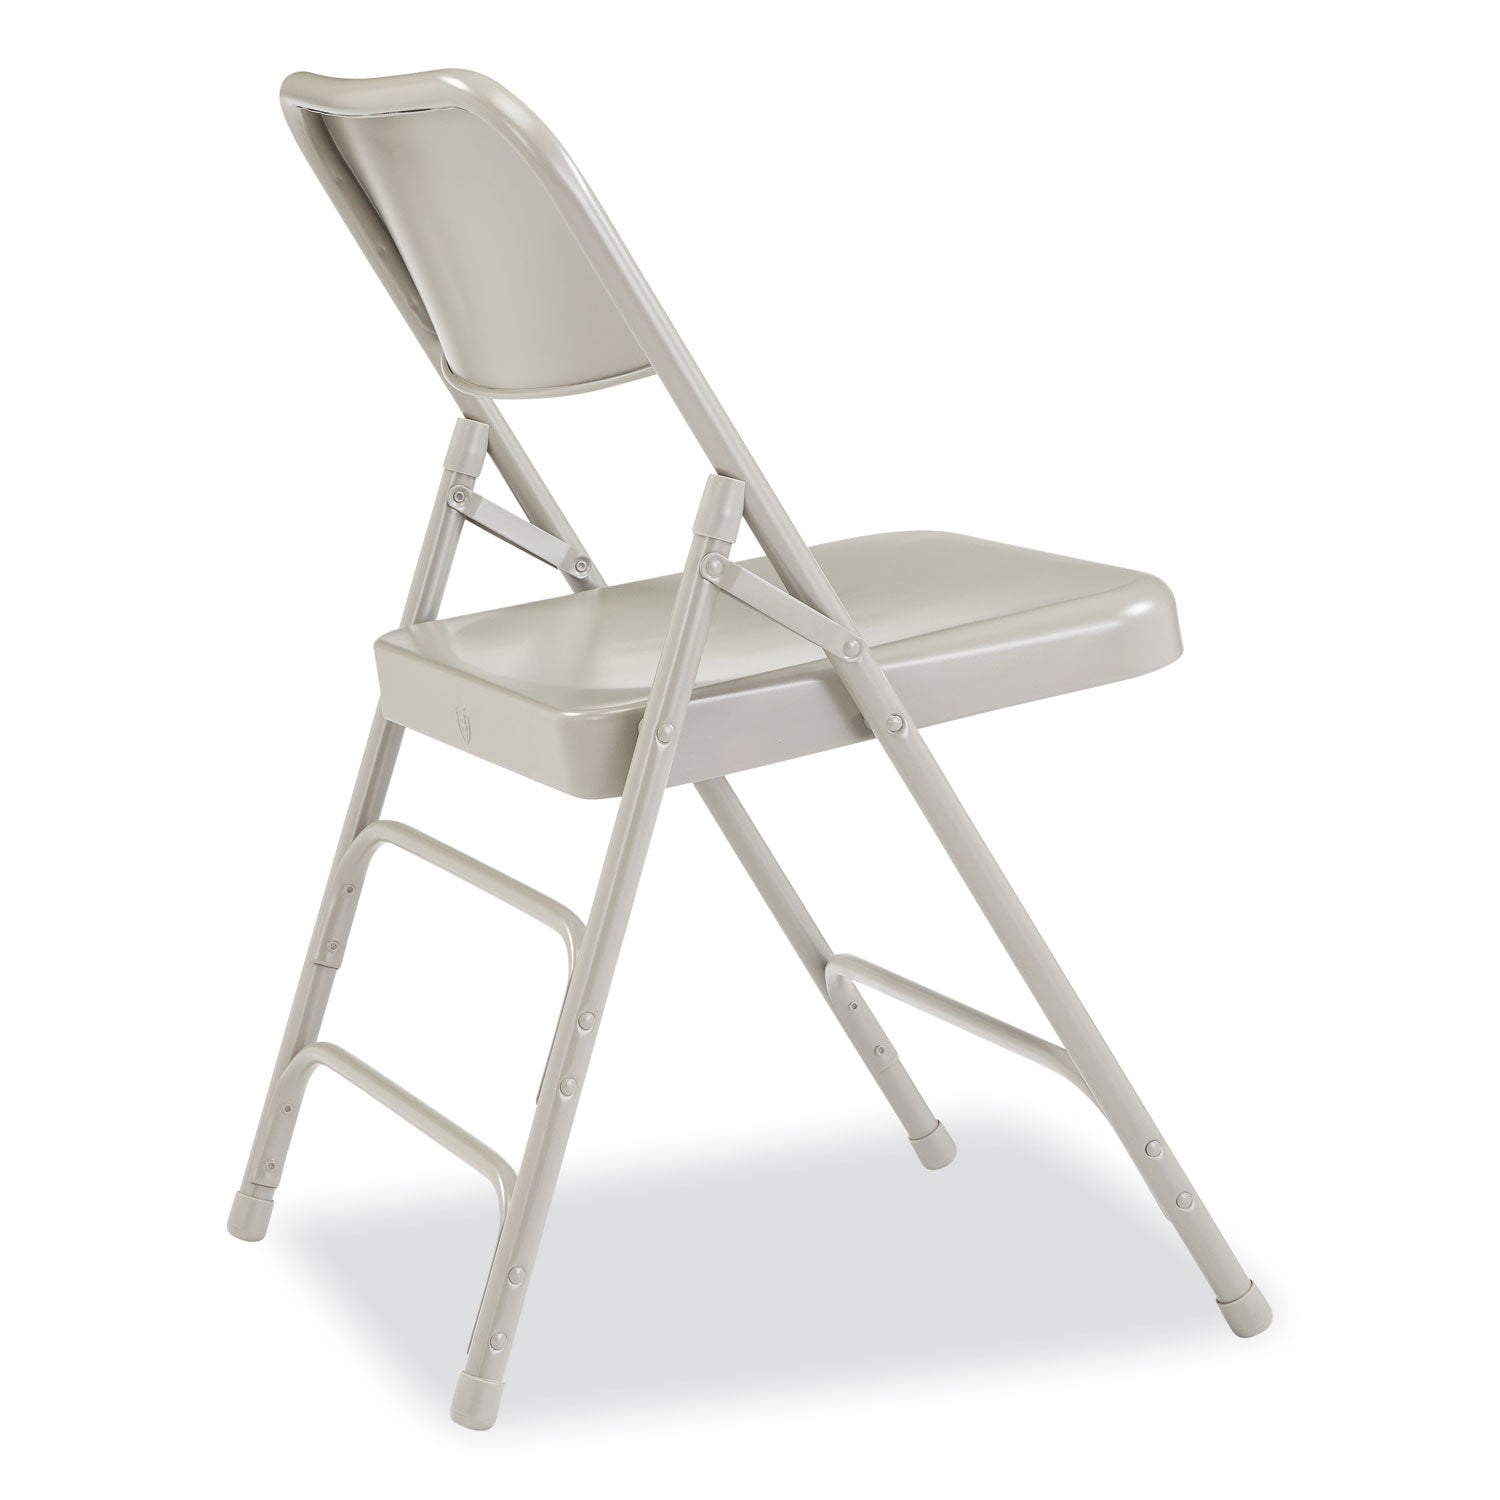 300-series-deluxe-all-steel-triple-brace-folding-chair-supports-480-lb-1725-seat-height-gray-4-ctships-in-1-3-bus-days_nps302 - 4